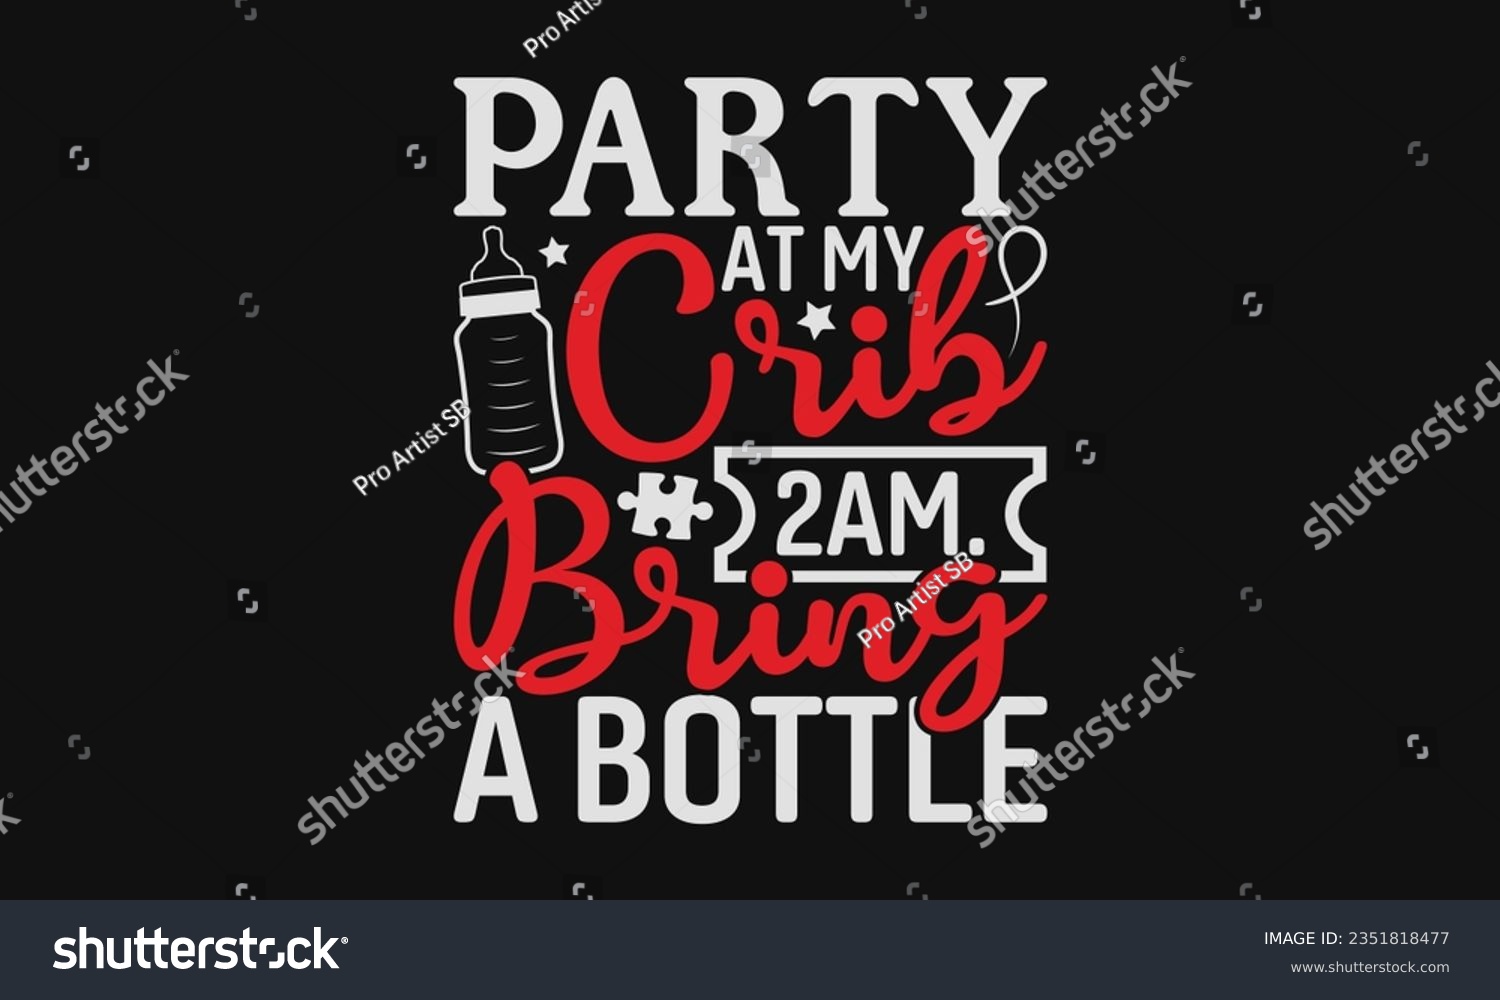 SVG of Party at my crib 2am. Bring a bottle - Baby SVG Design Sublimation, Kids Lettering Design, Vector EPS Editable Files, Isolated On White Background, Prints On T-Shirts And Bags, Posters, Cards. svg